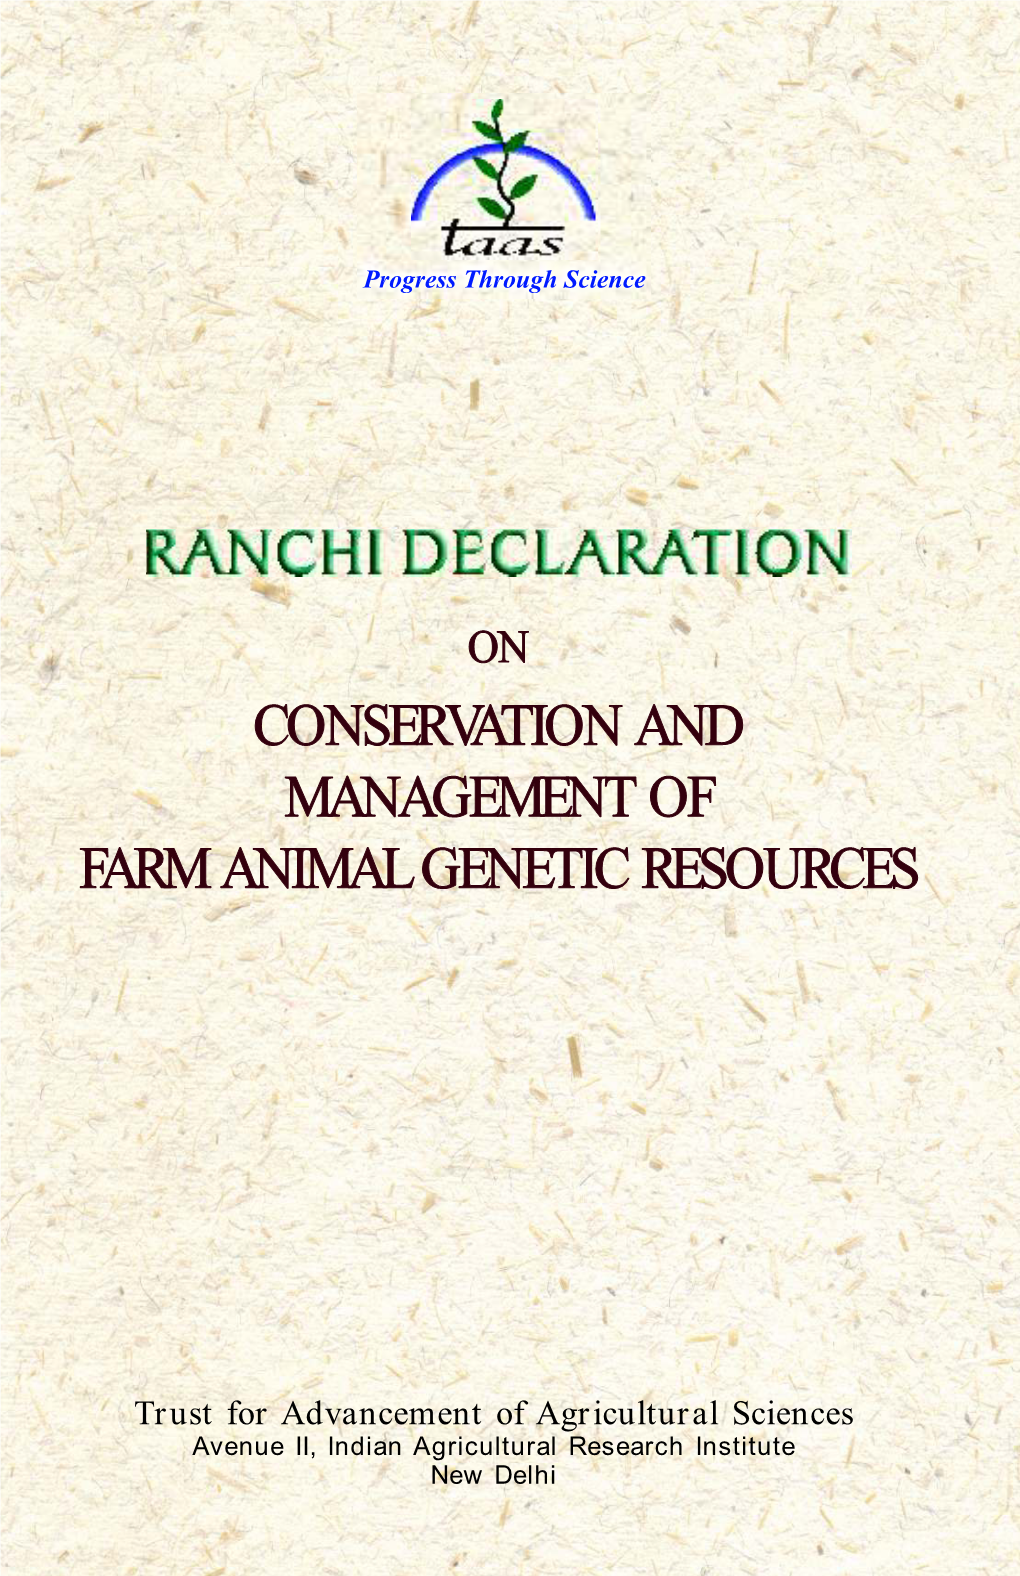 Strategy for Conservation of Farm Animal Genetic Resources